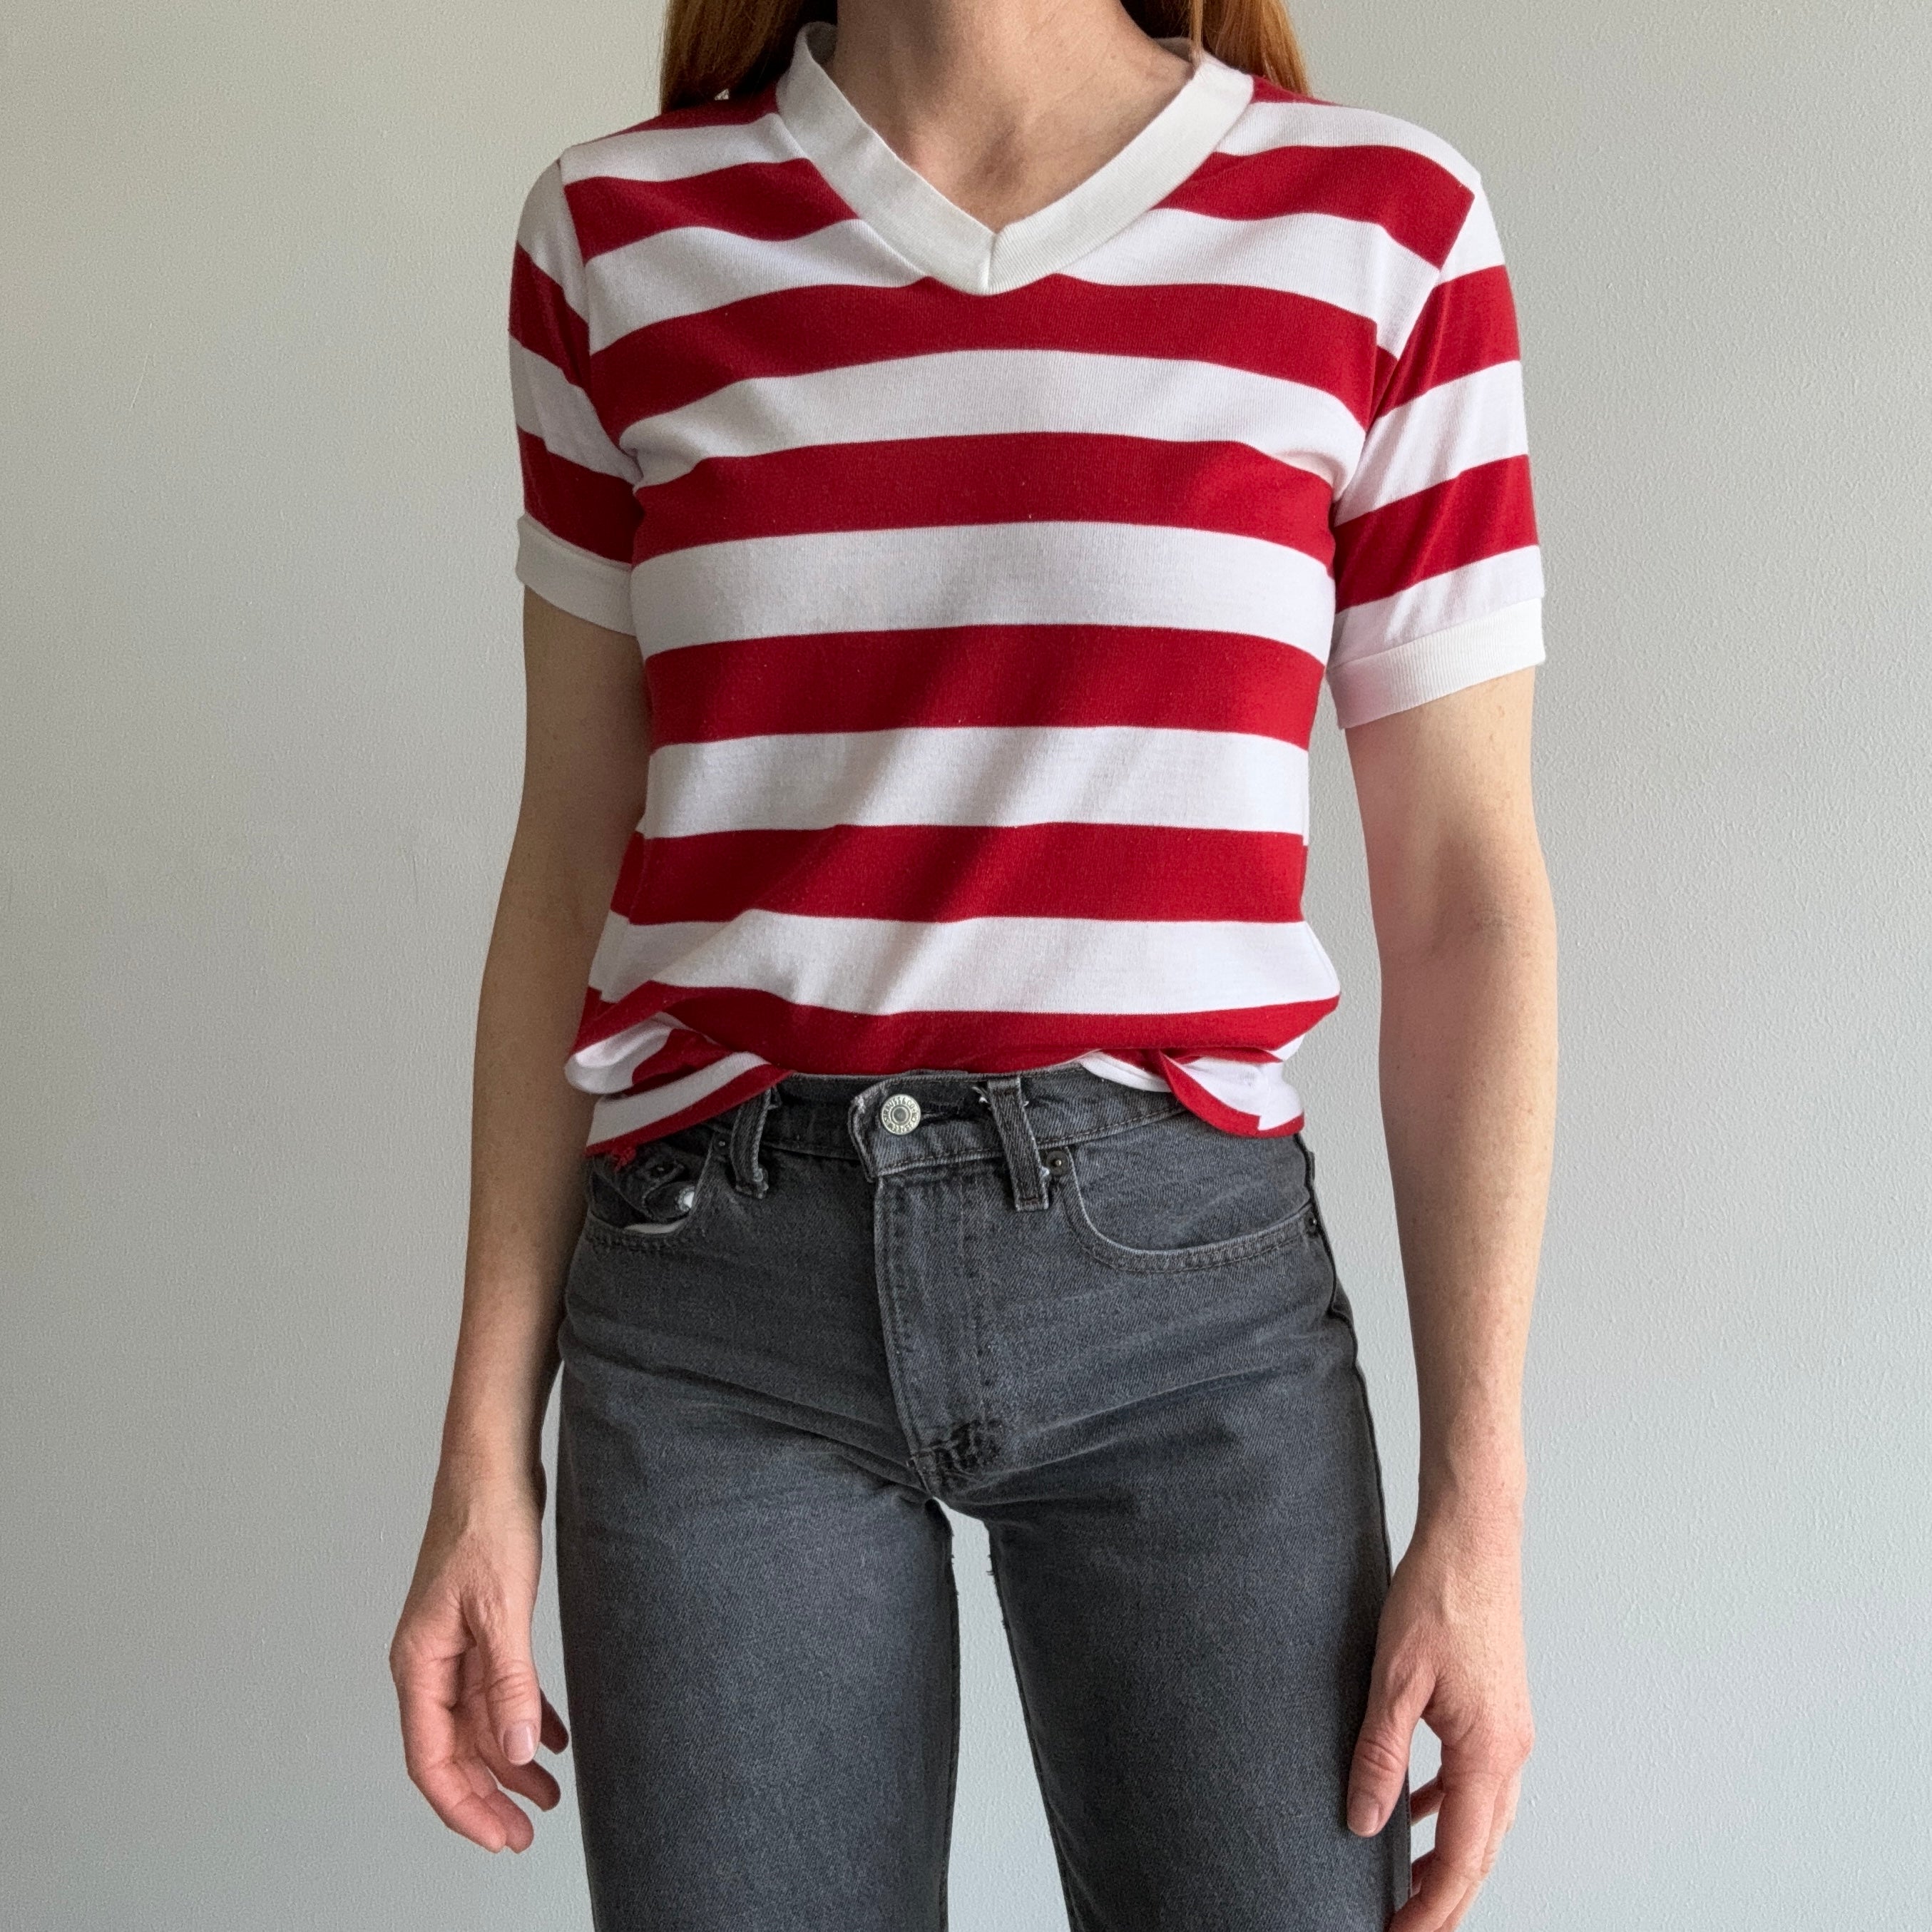 1980s Dark Red and White Striped Ring Shirt !!!